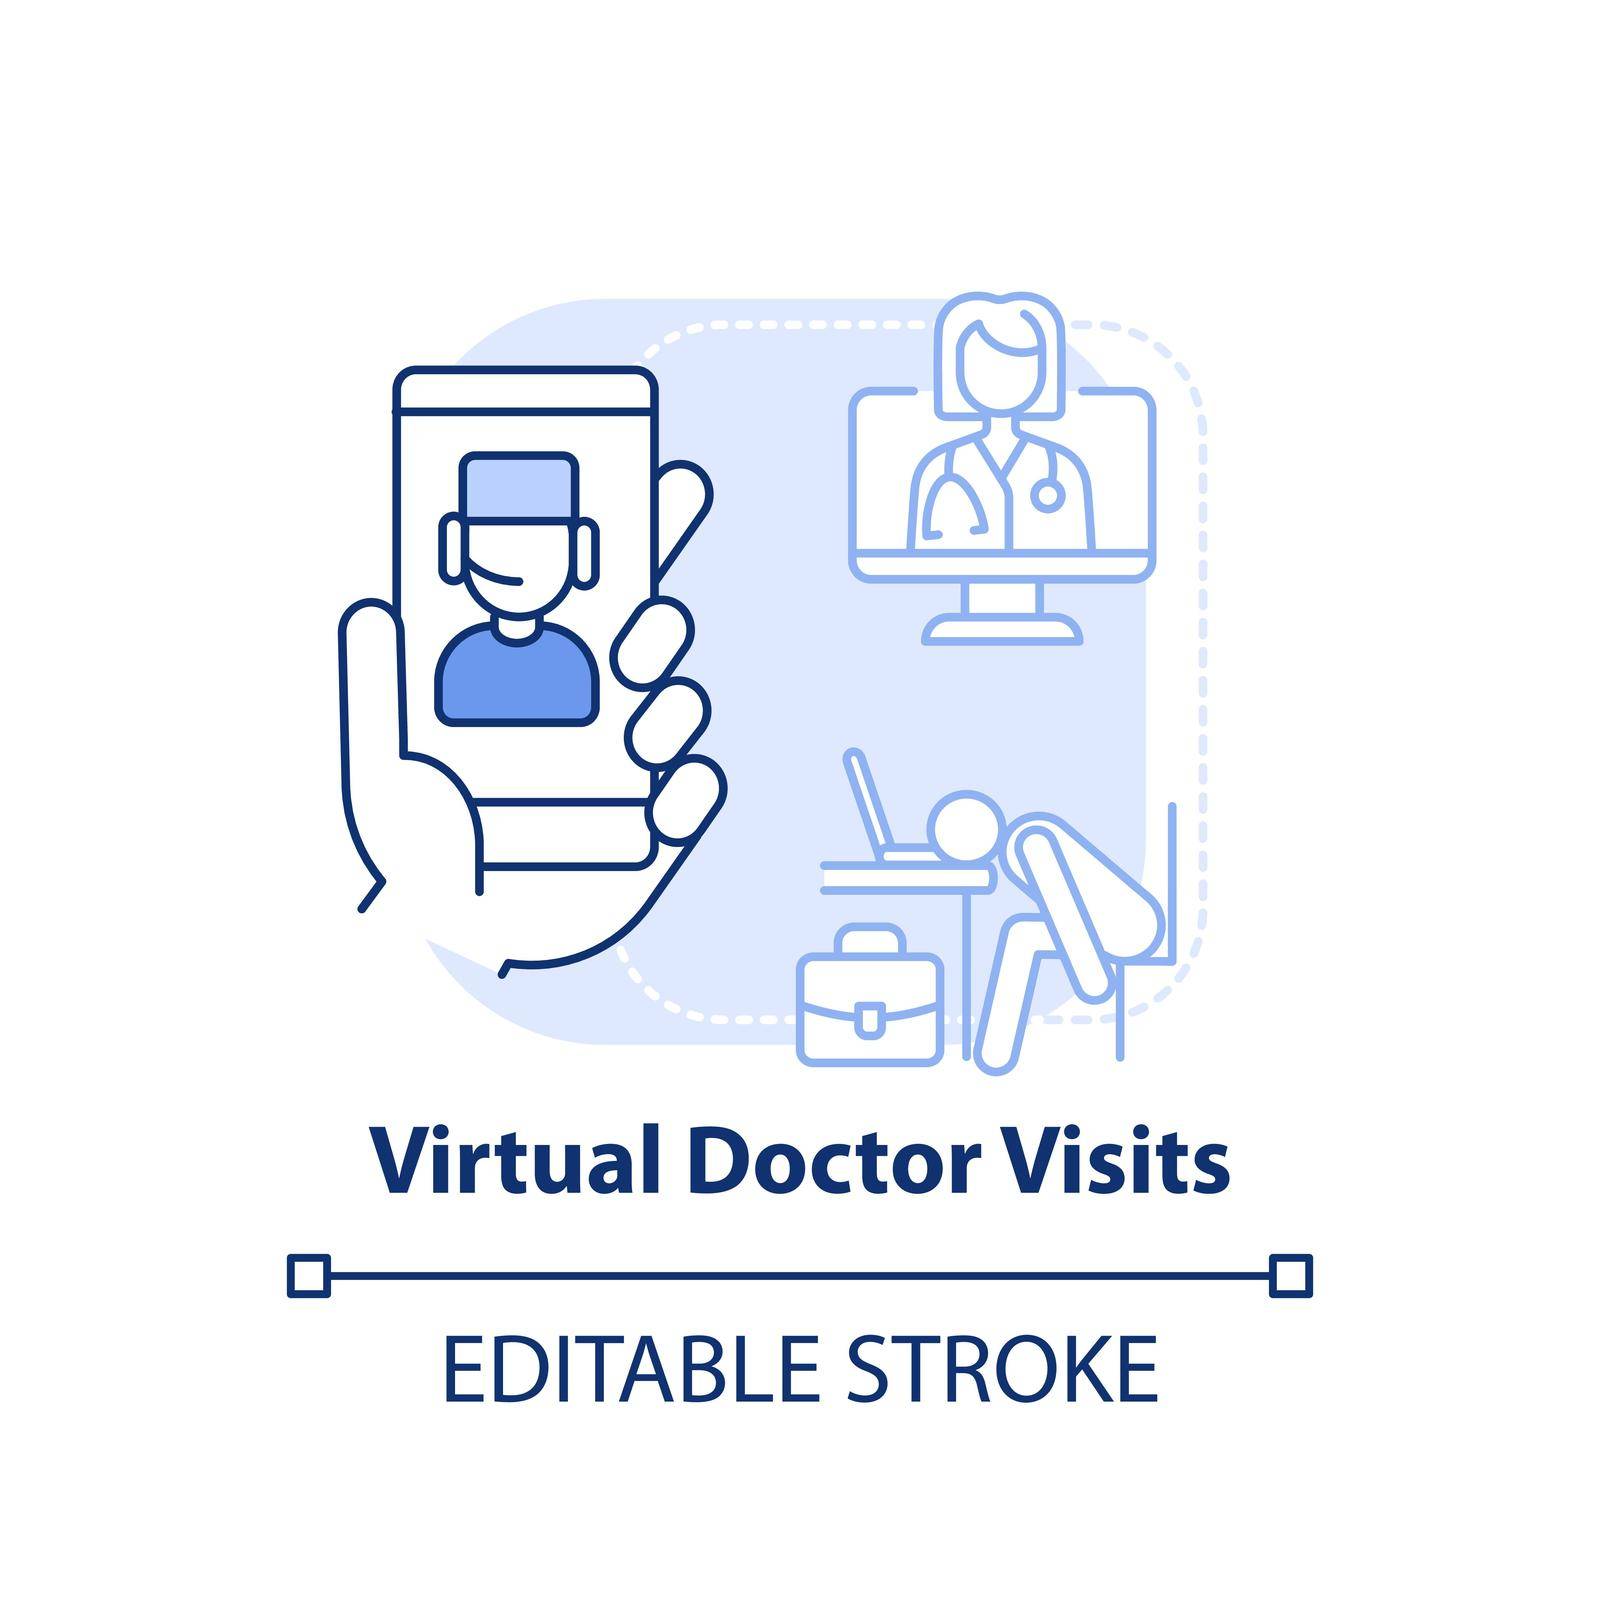 Virtual doctor visits light blue concept icon by bsd